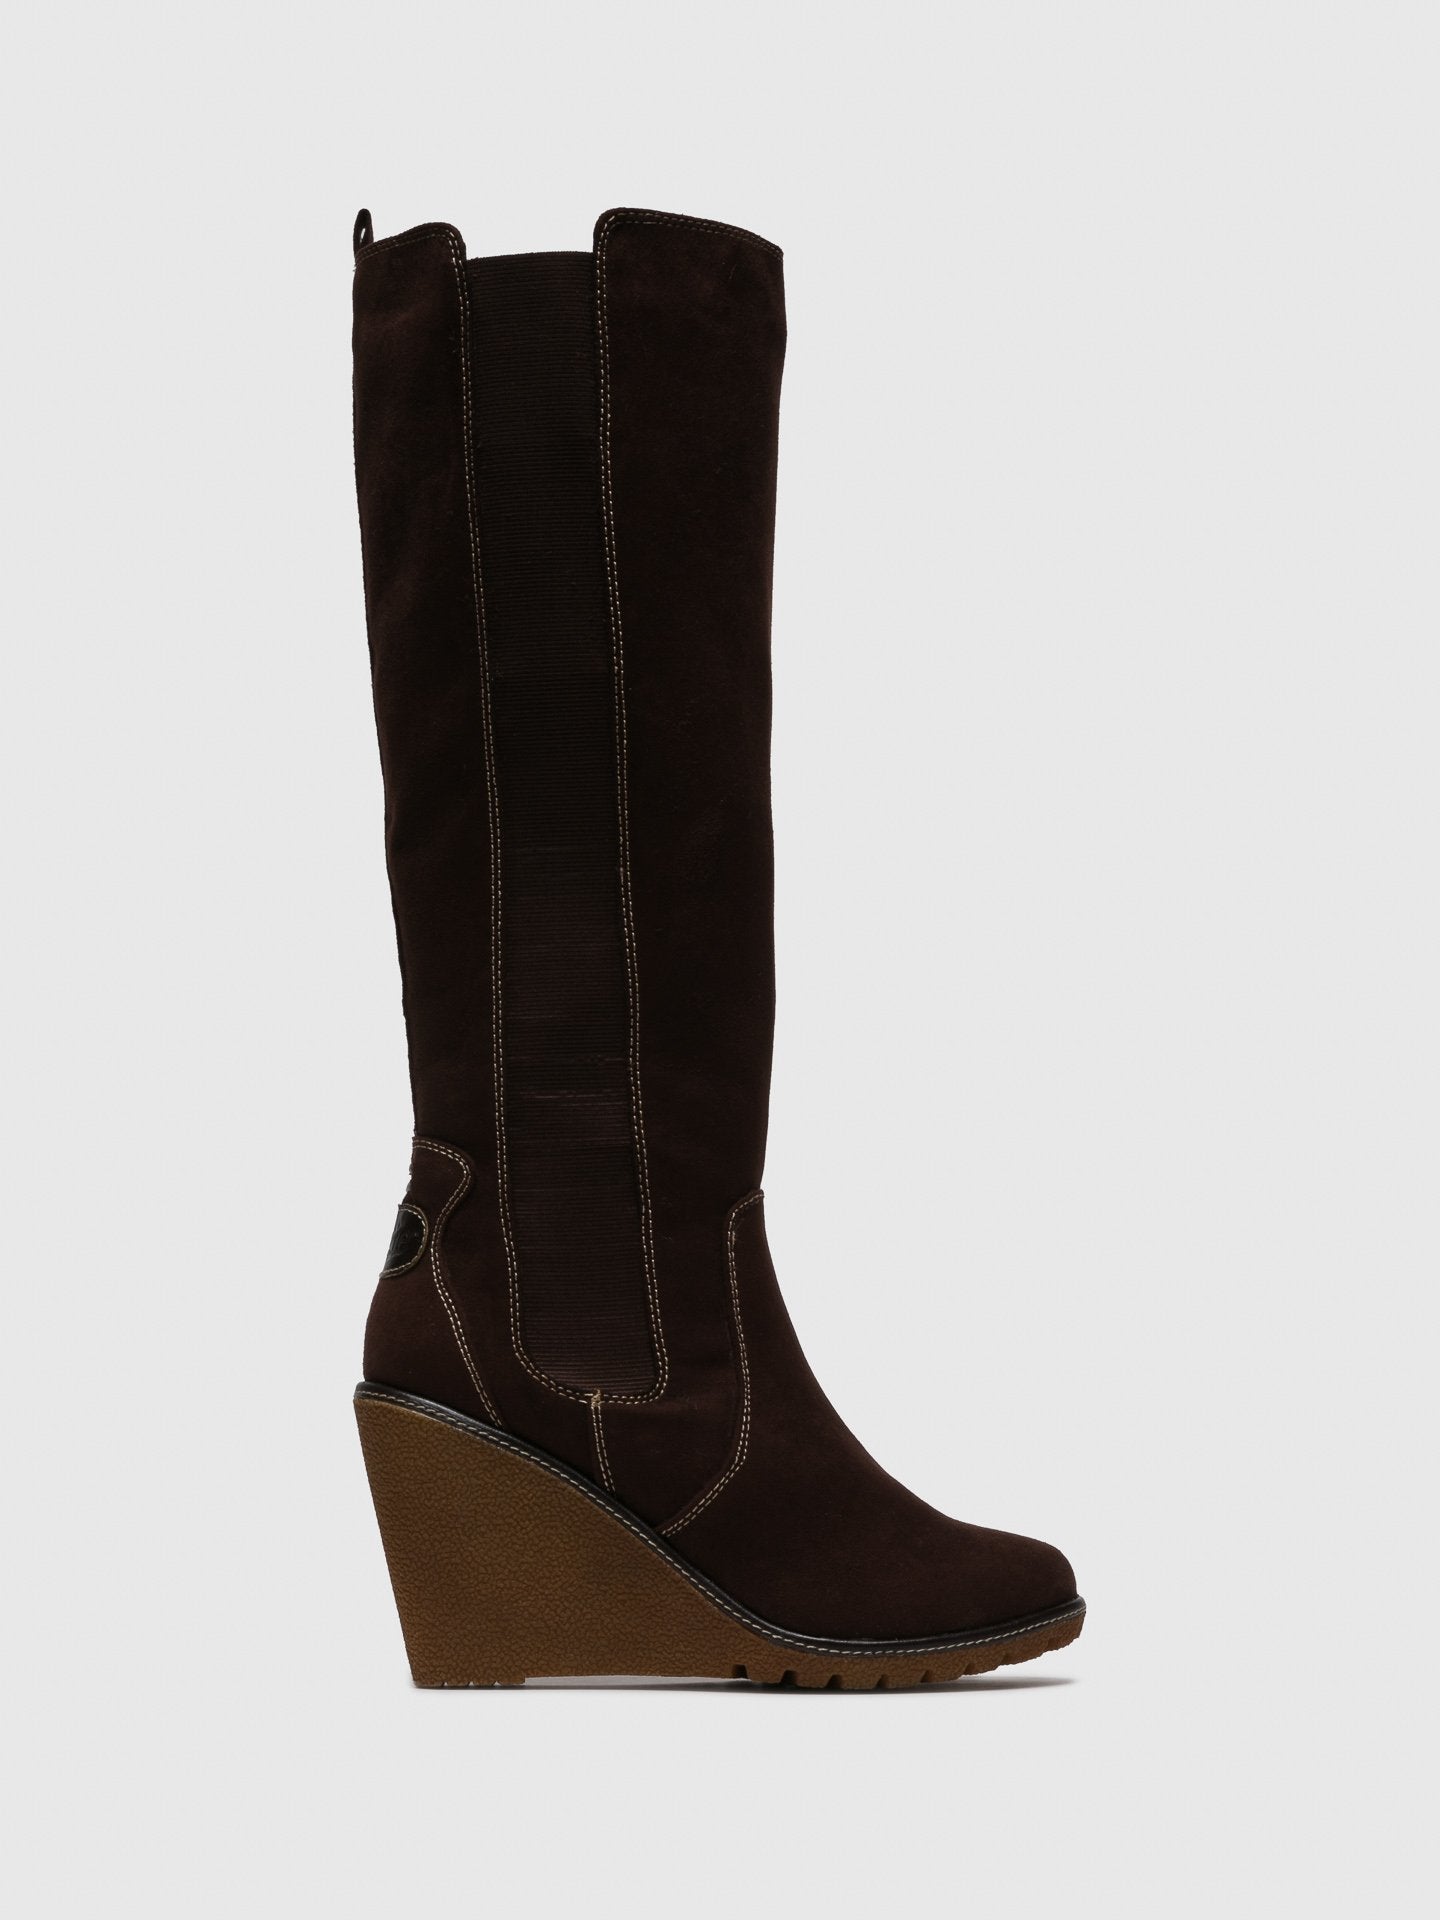 Pixie Chocolate Knee-High Boots